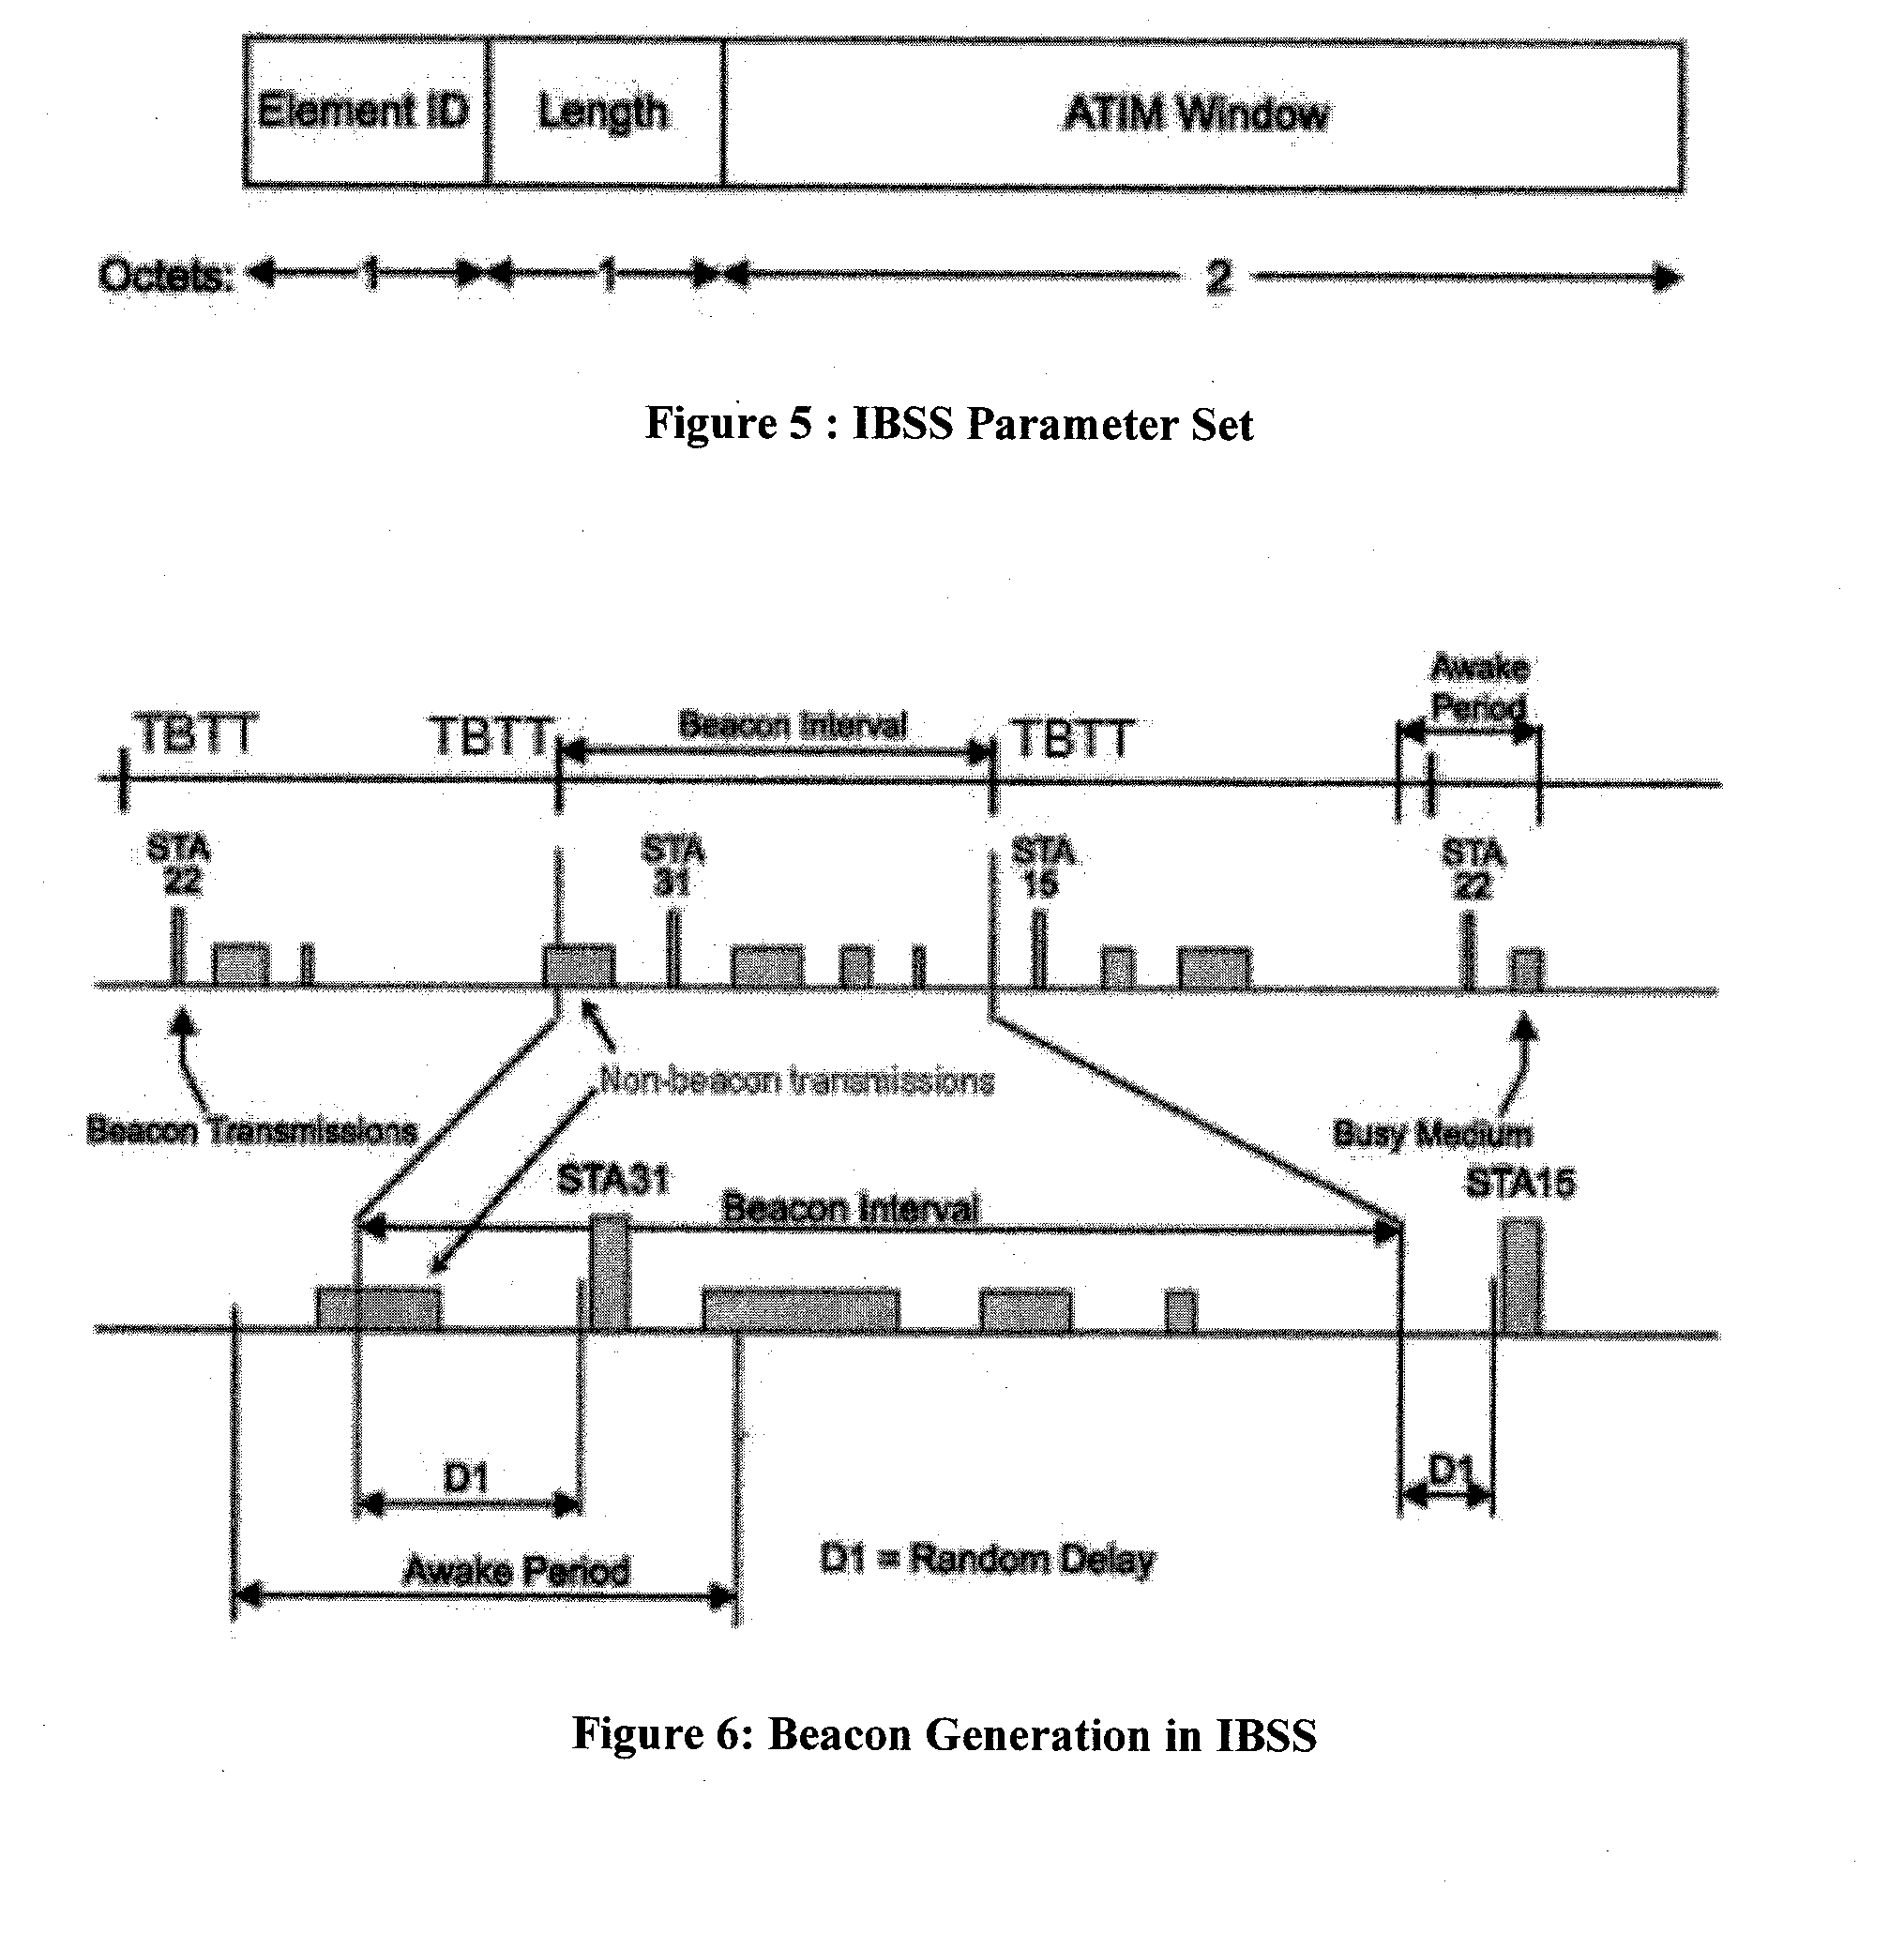 Method and apparatus for optimal atim size setup for 802.11 networks in an ad hoc mode